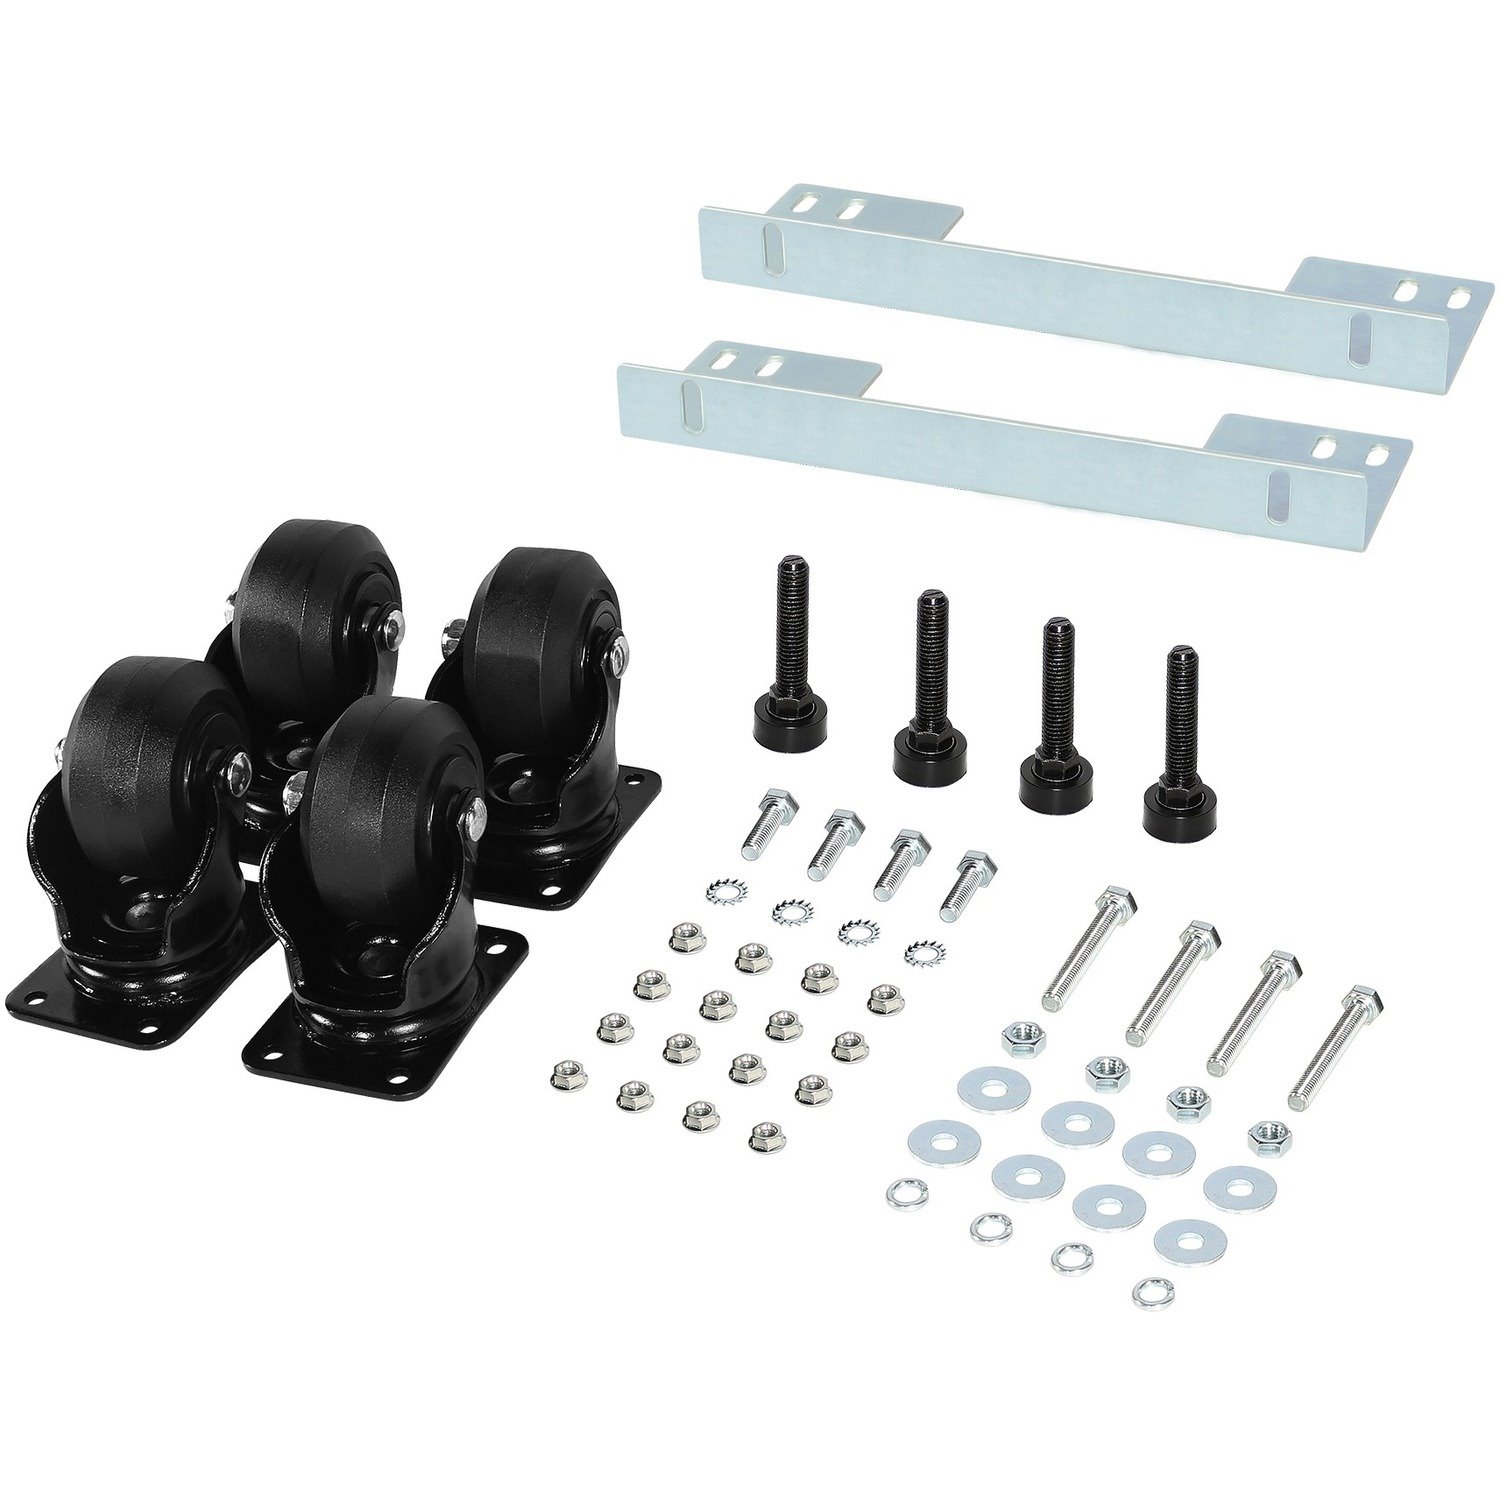 CyberPower Carbon Rack Caster Kit - Silver, Black